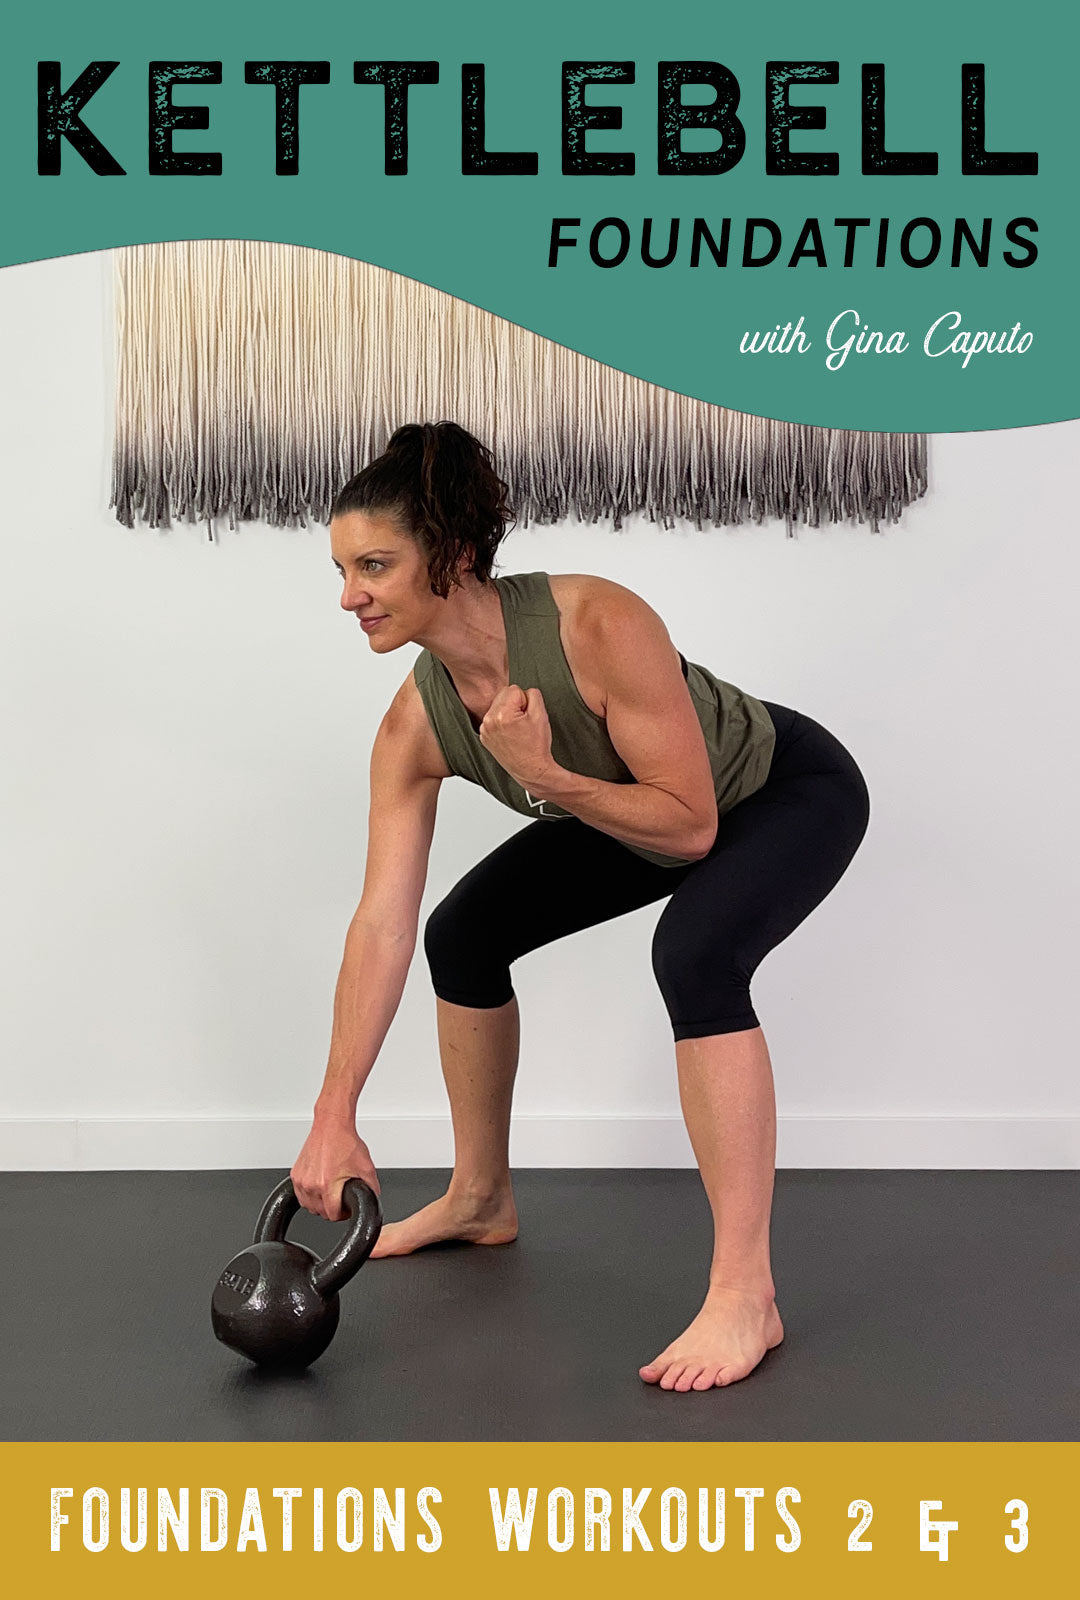 Kettlebell Foundations Workouts 2 + 3